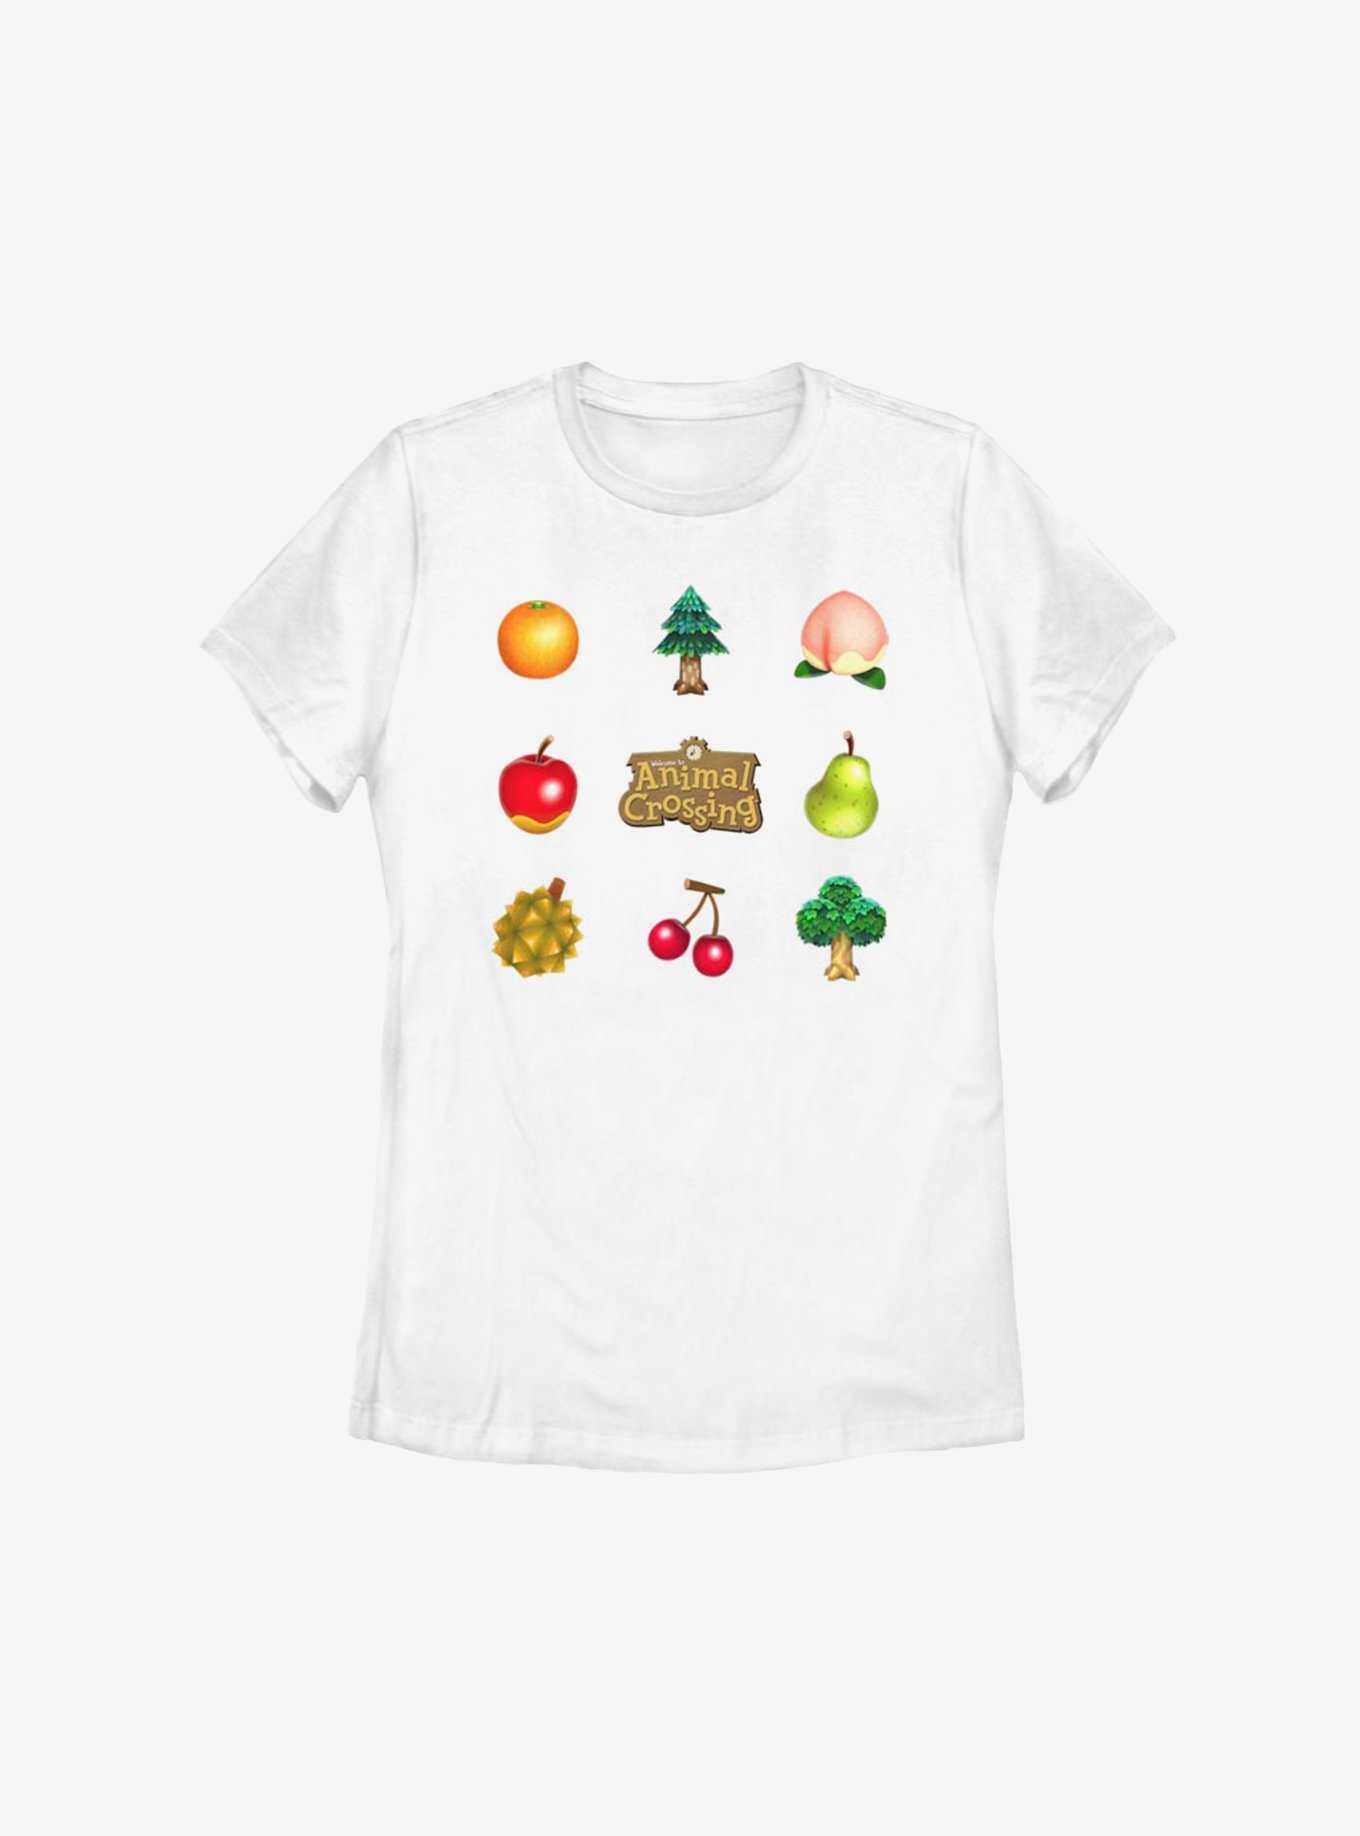 Animal Crossing Fruit And Trees Womens T-Shirt, , hi-res